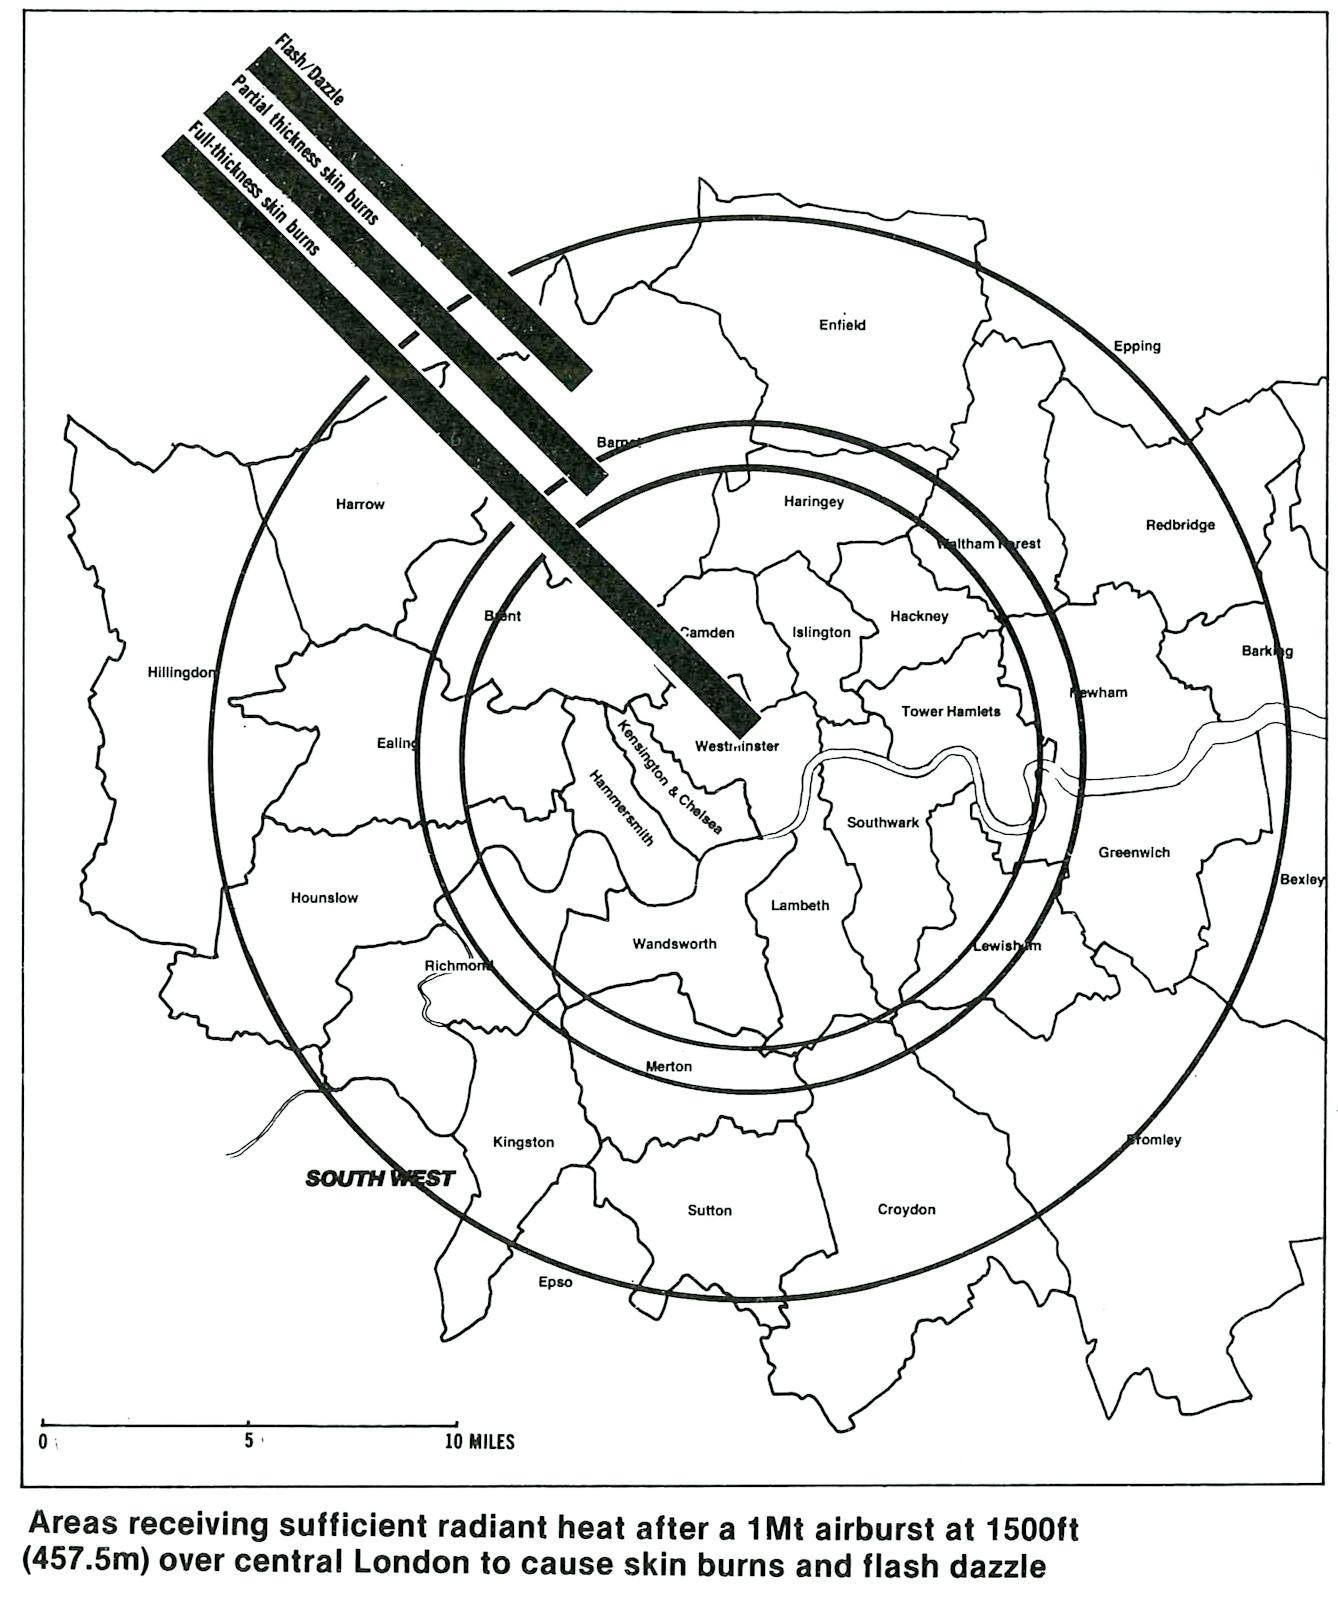 A map showing the consequences of a nuclear blast over central London